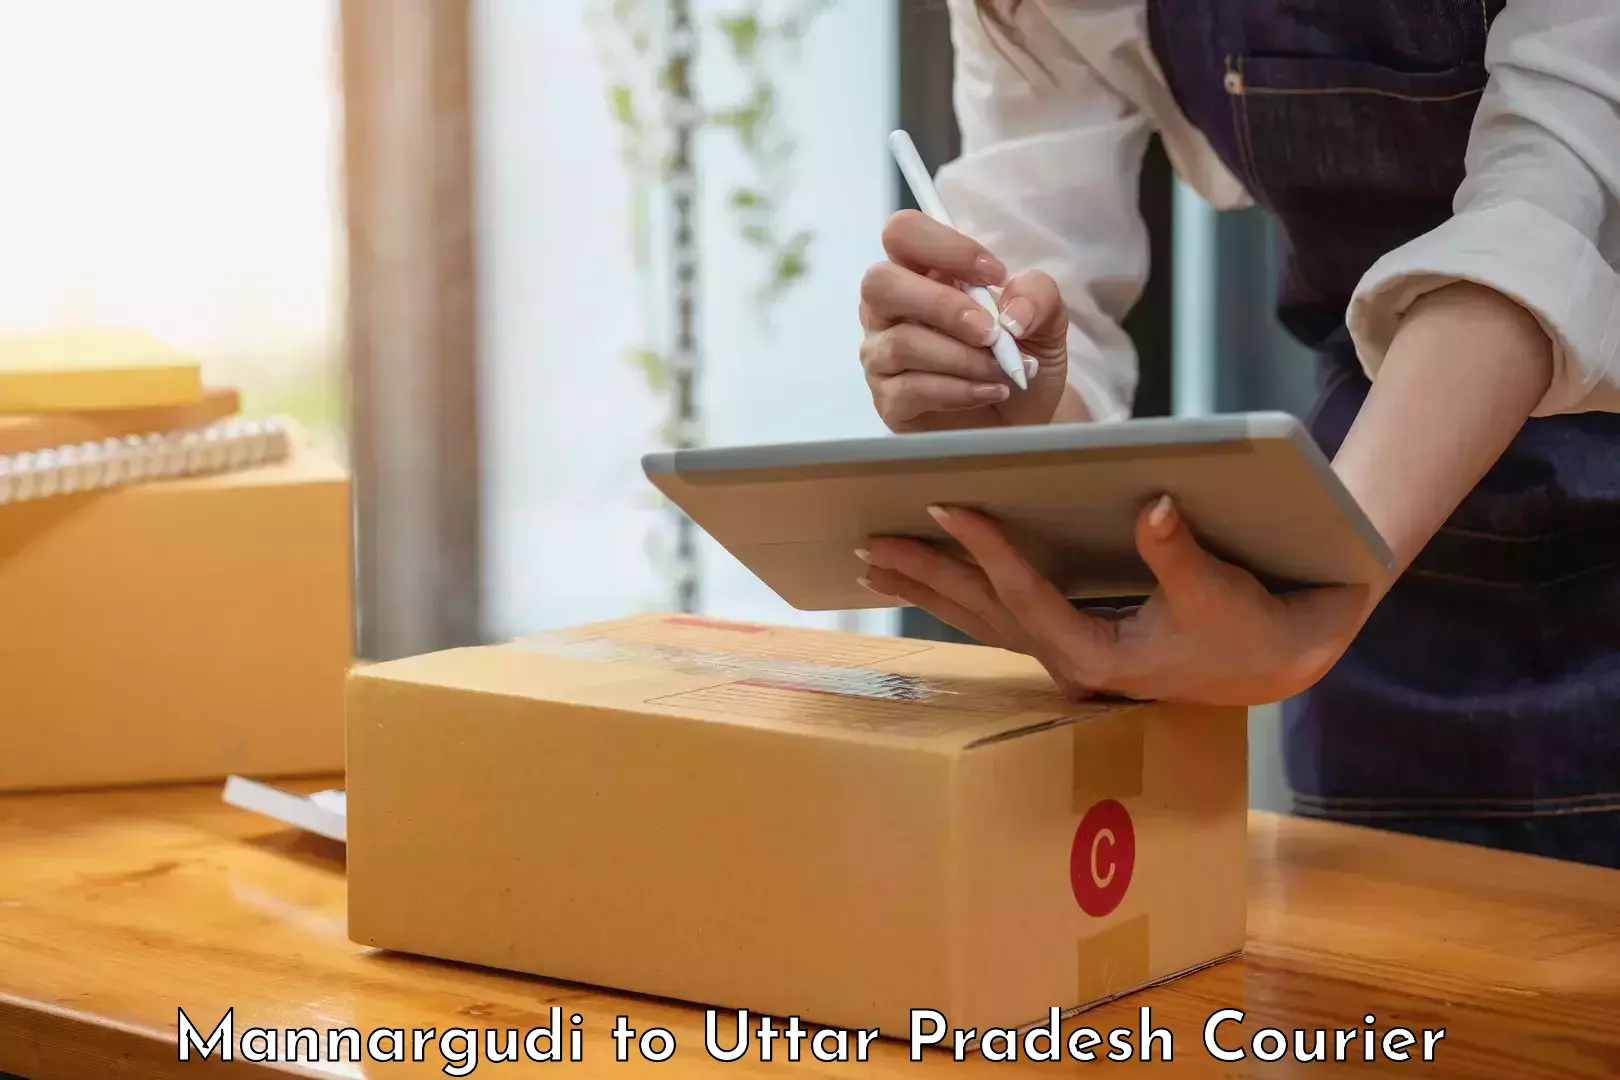 Automated parcel services Mannargudi to Renukoot